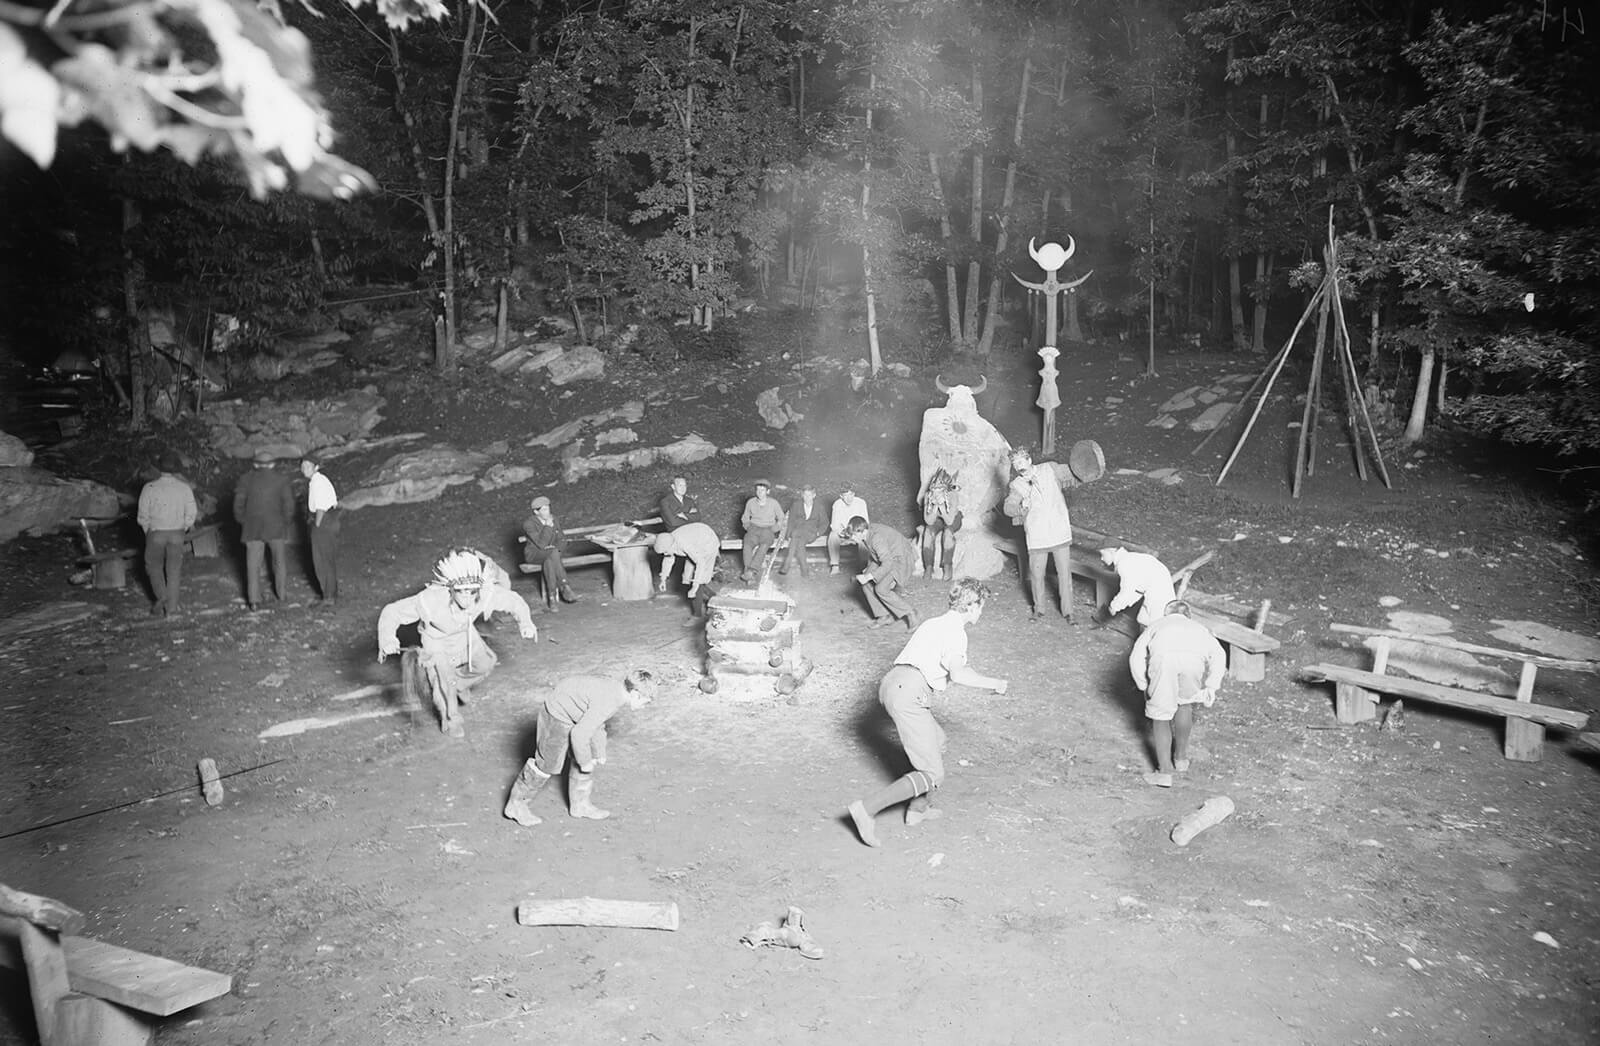 A photograph of a group of men enacting the Native “War dance” within a woodland area at Wyndygoul, Seton’s estate near Cos Cob, Connecticut, date unknown.